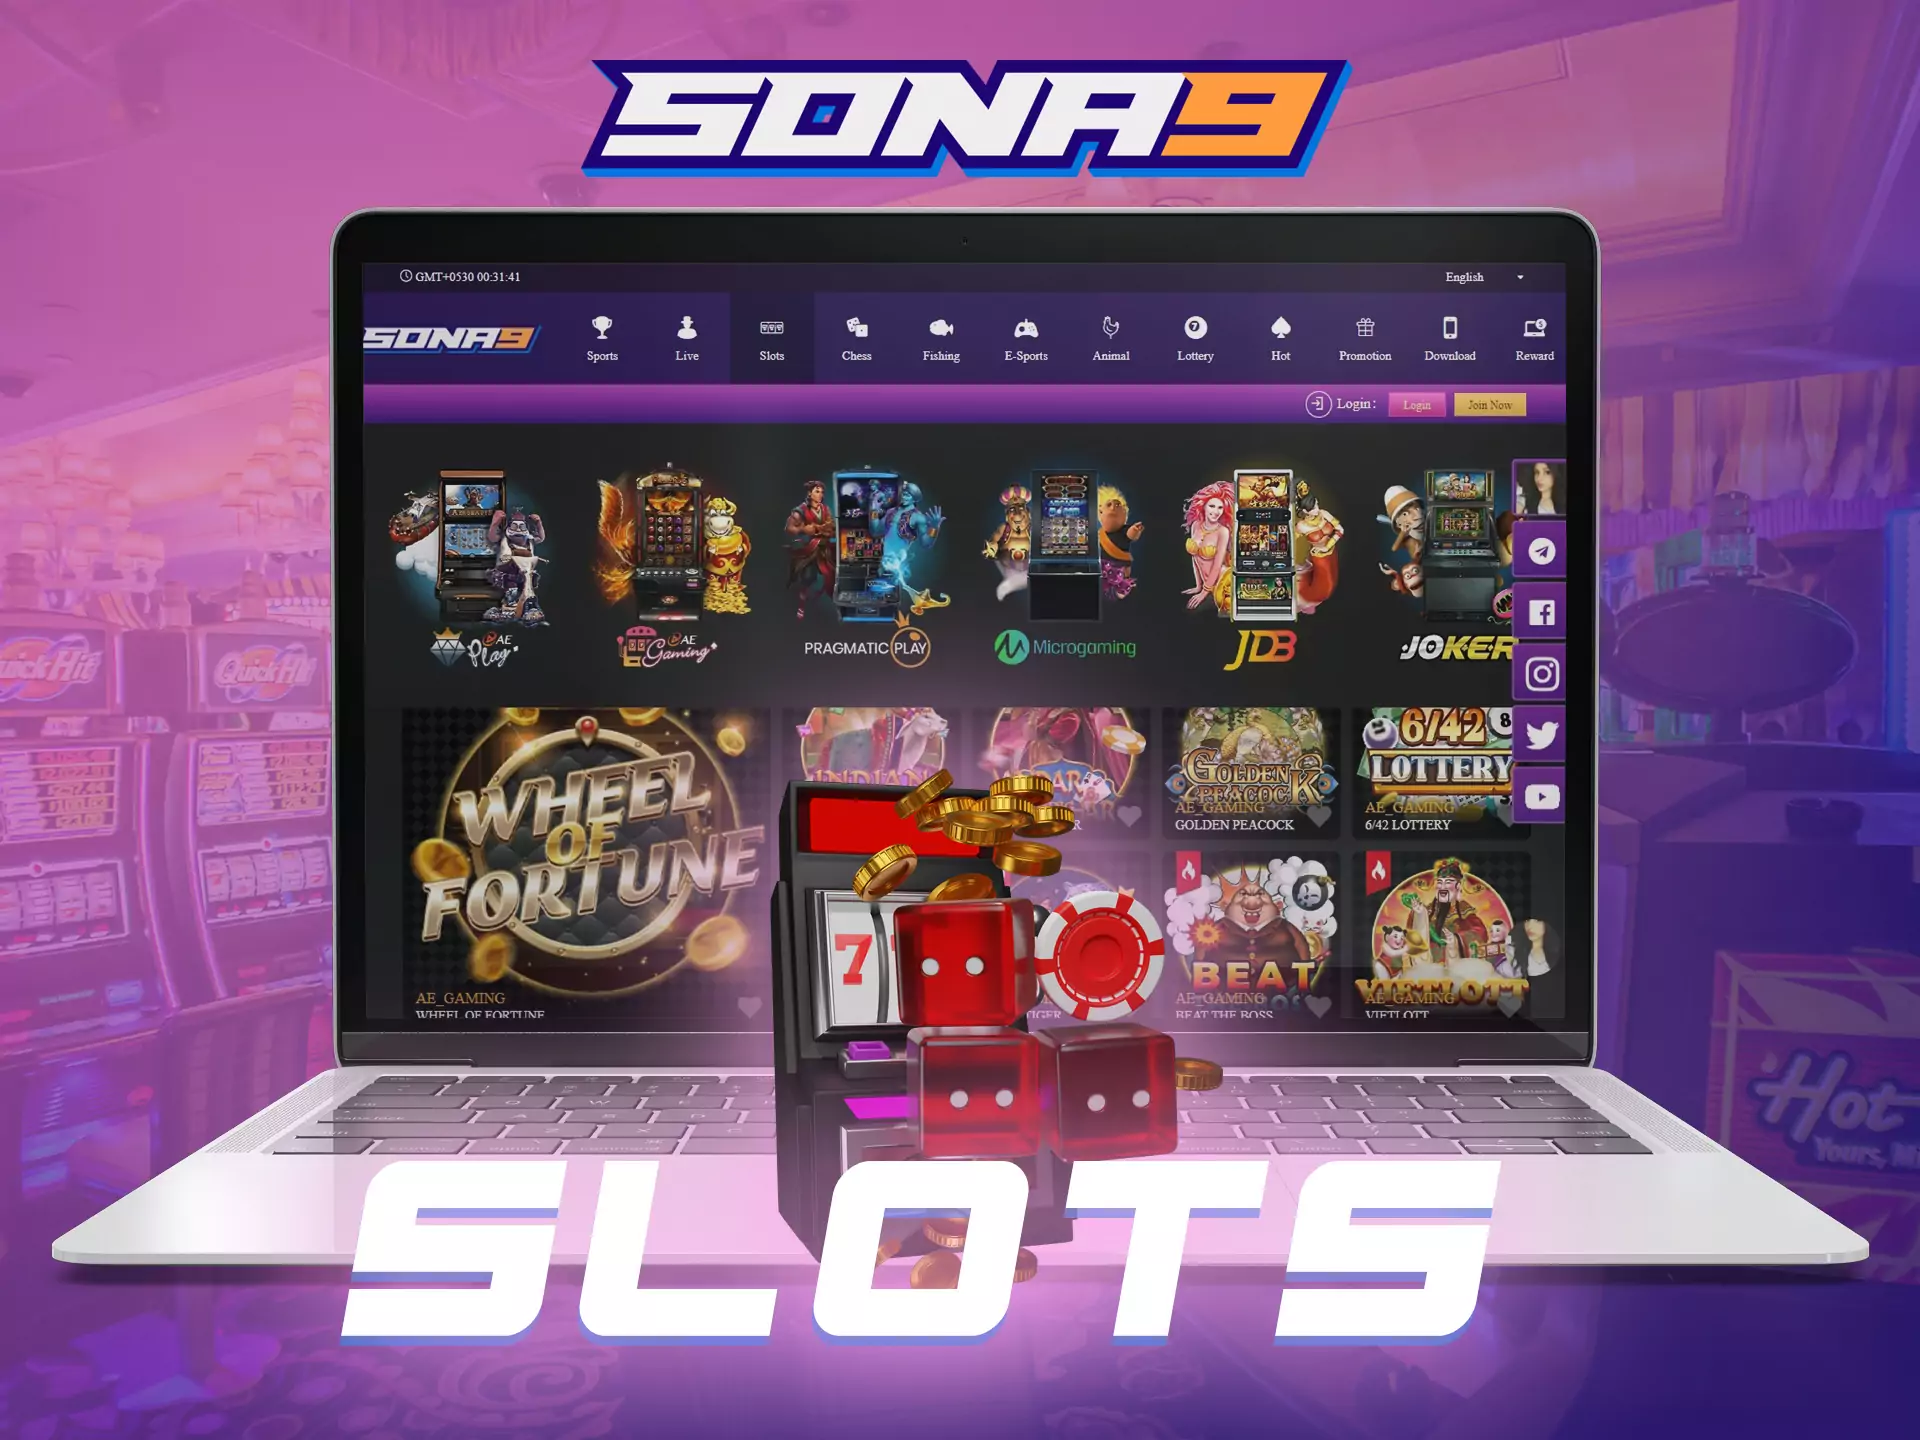 To win a jackpot, play slot machines in the Sona9 online casino.